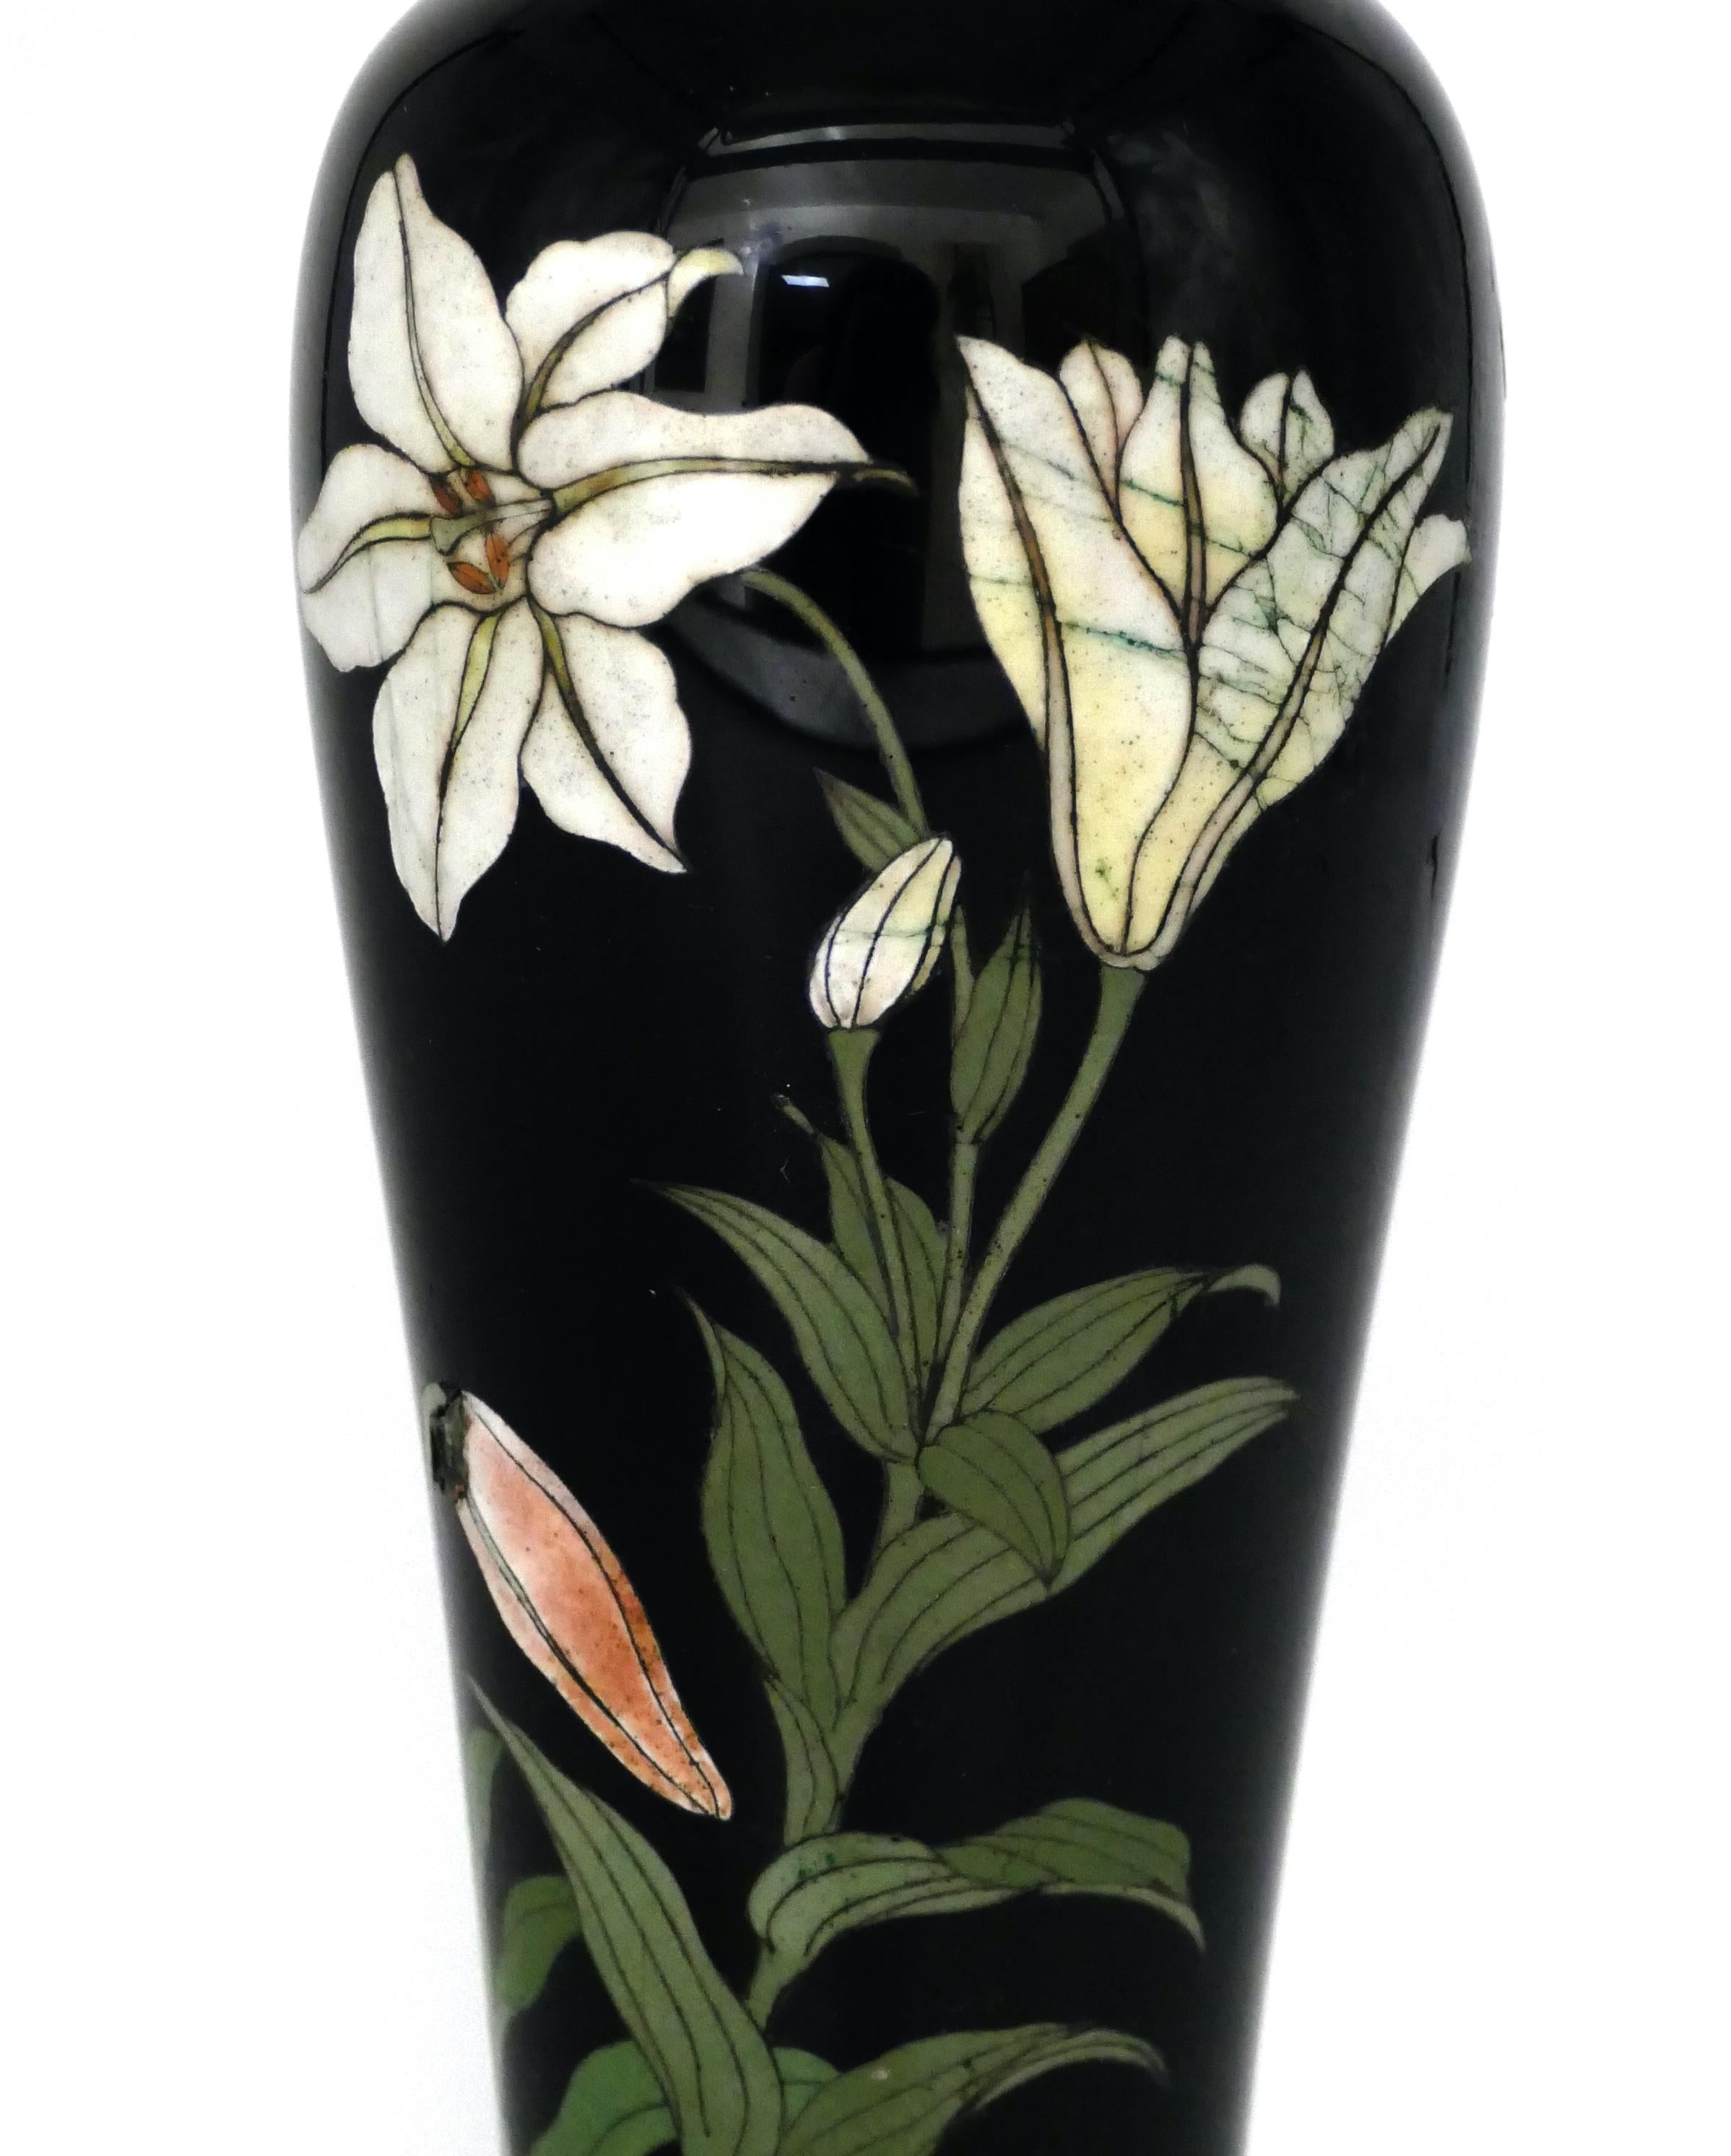 This is a superb Cloisonné vase, with a floral motif on a black background.

Likely produced in Japan at the turn of the 19th and 20th centuries.

In very good condition, except for light scratches and some visible cracks on the white enamel